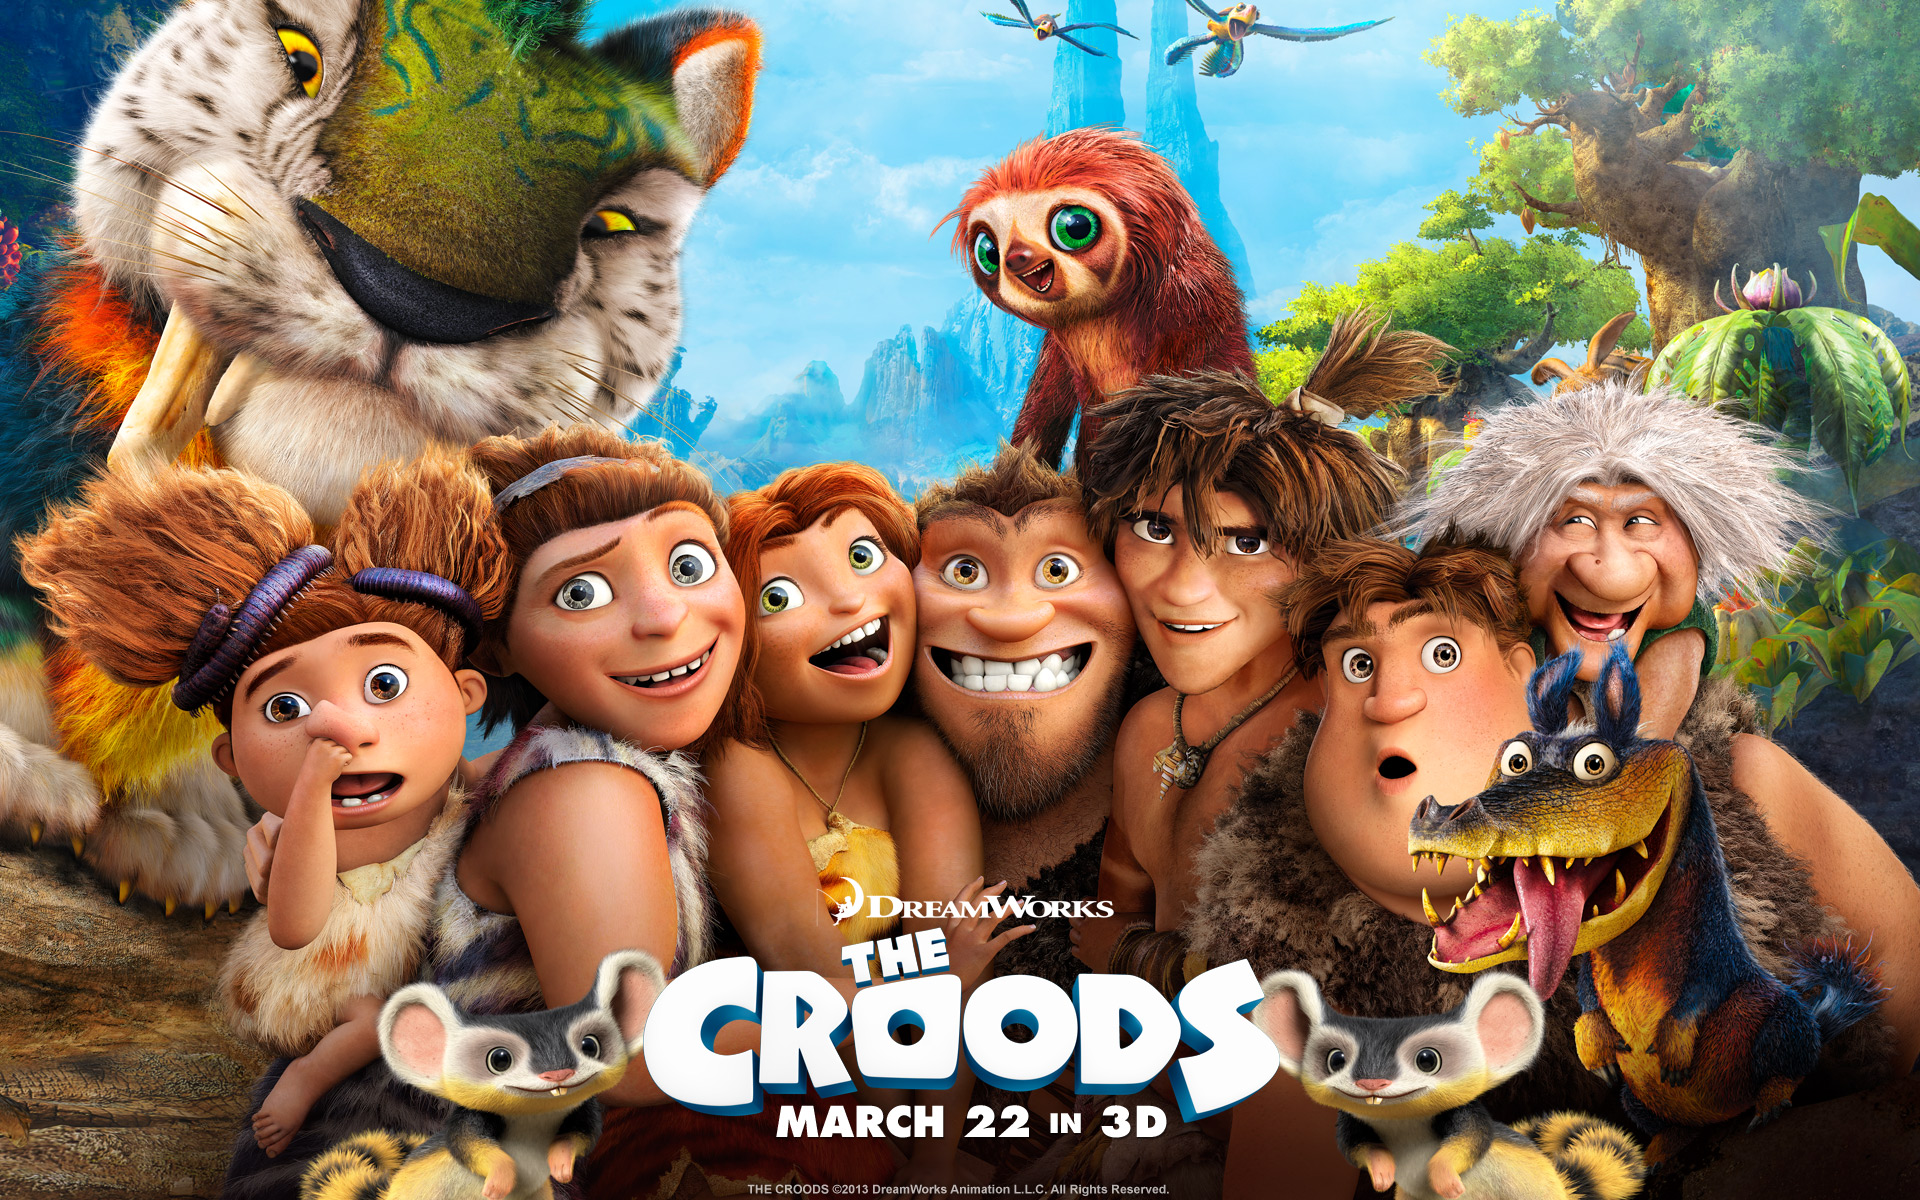 hd-wallpapers-the-croods-s-1080p-movies-wallpaper-hd